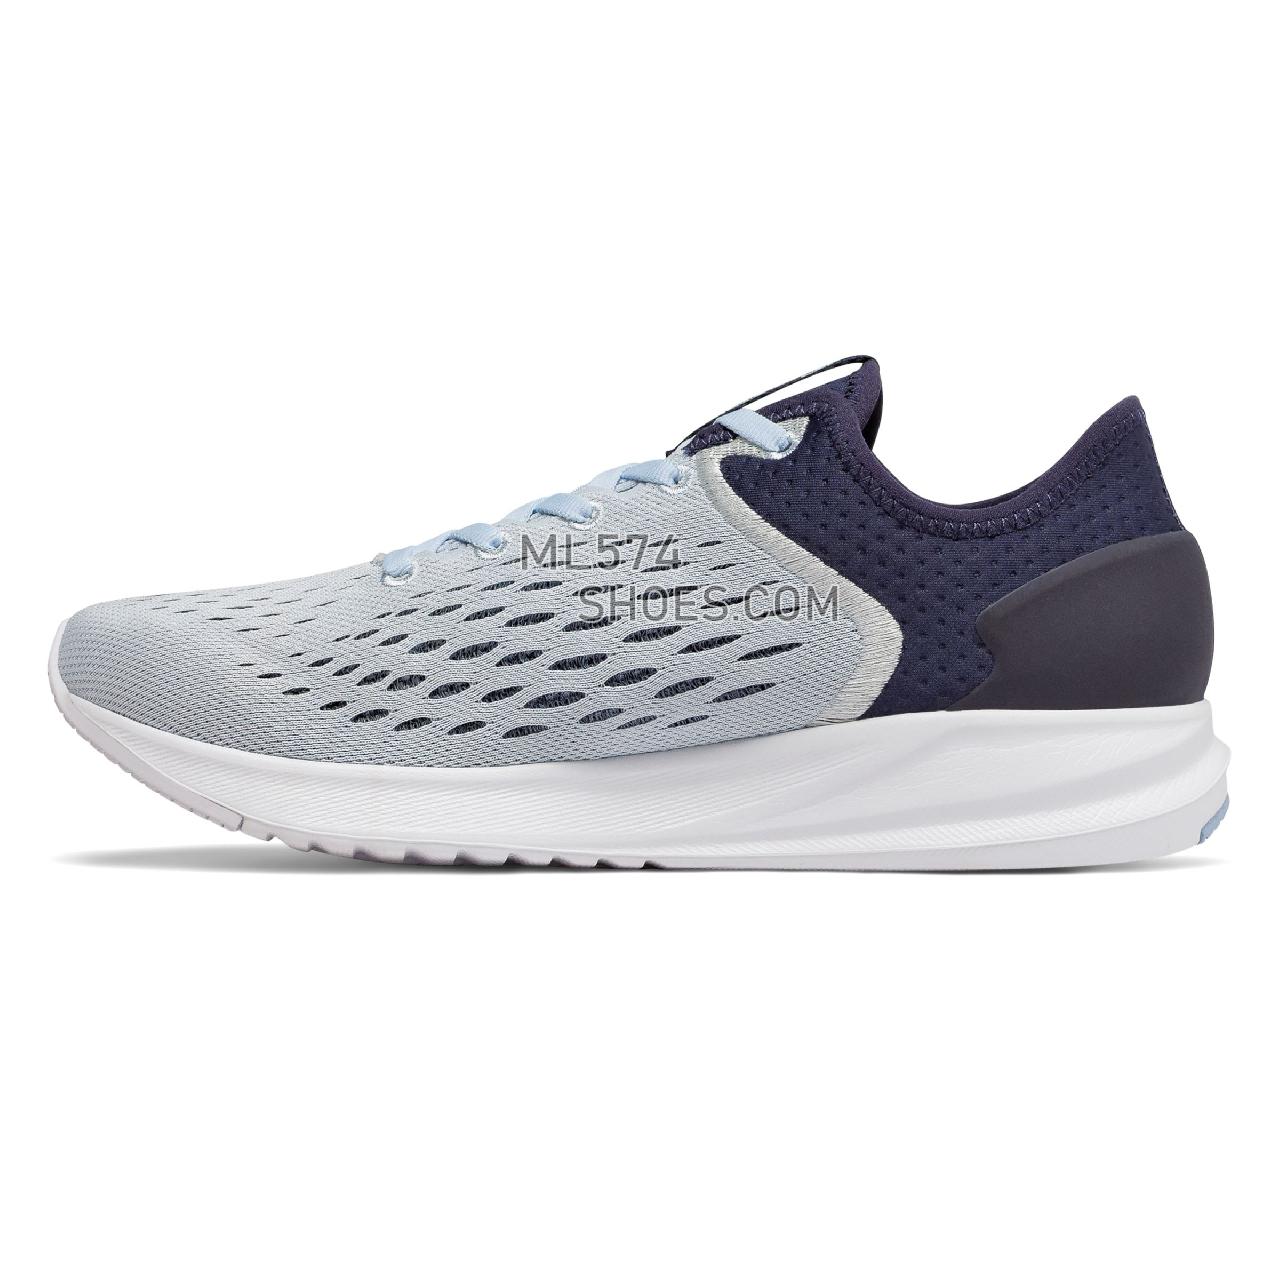 New Balance FuelCore 5000 - Women's FuelCore 5000 Running - Air with Pigment and Summer Sky - WFL5KAB